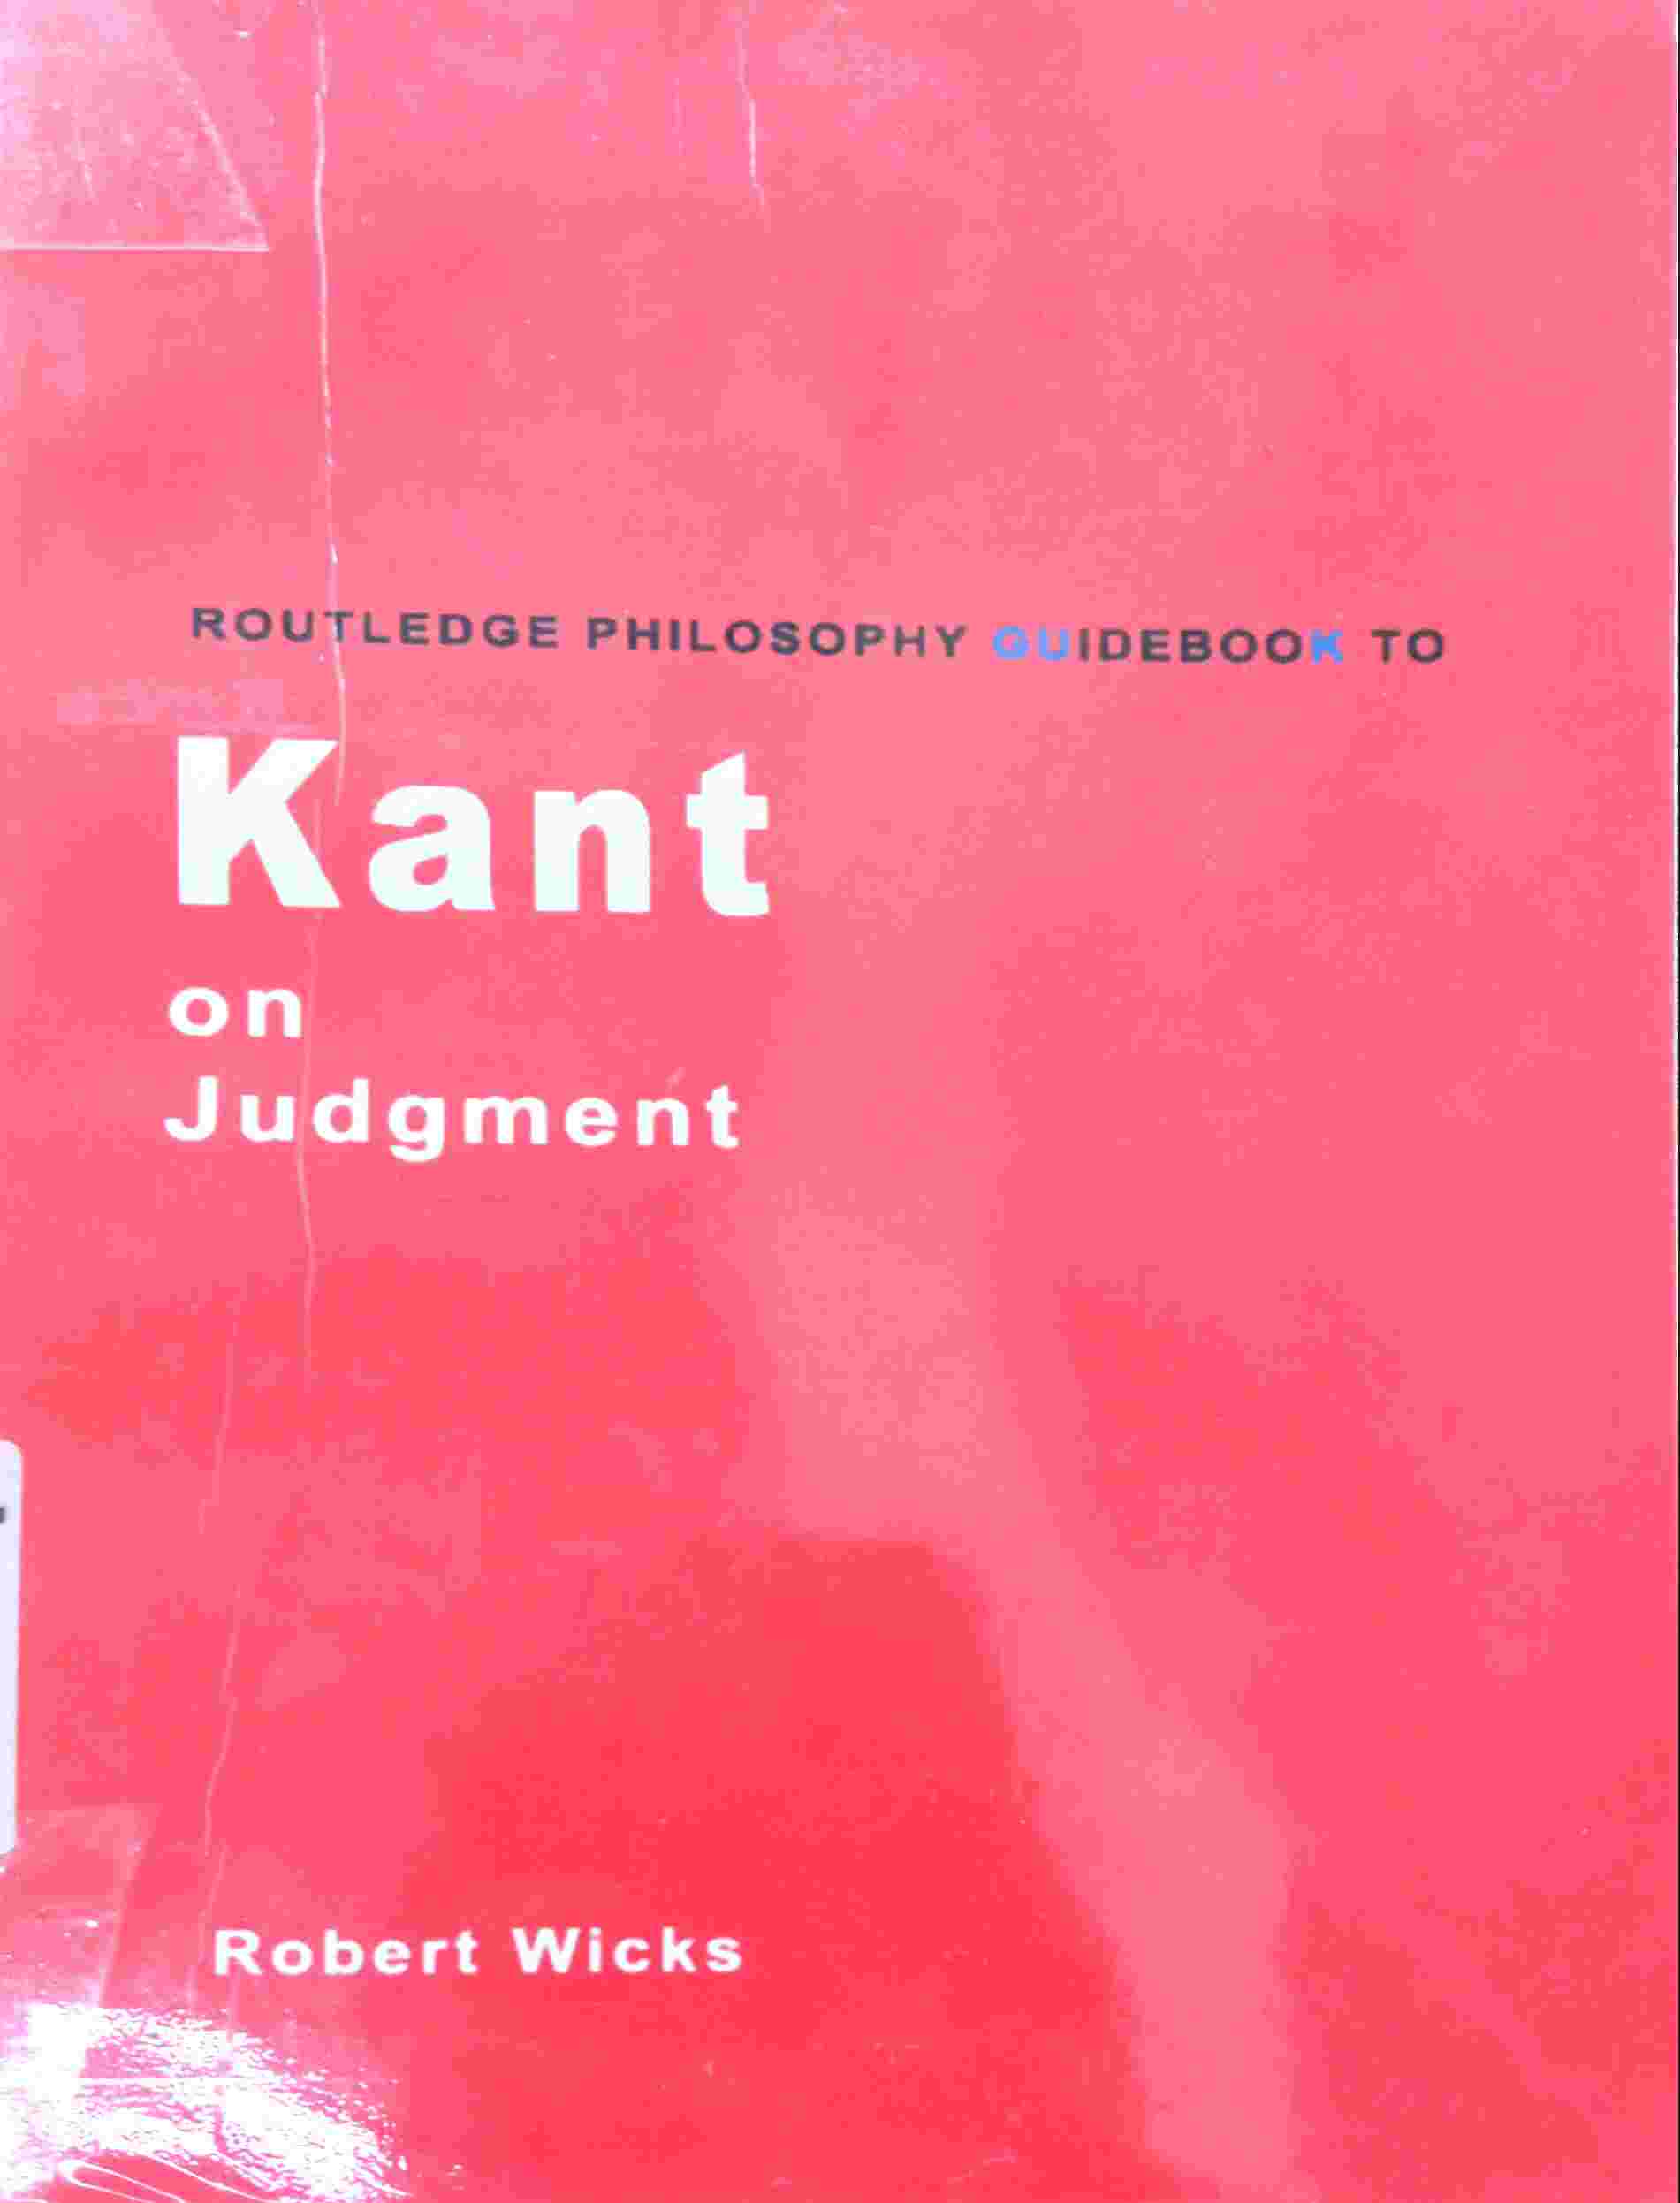 ROUTLEDGE PHILOSOPHY GUIDEBOOK TO KANT ON JUDGMENT